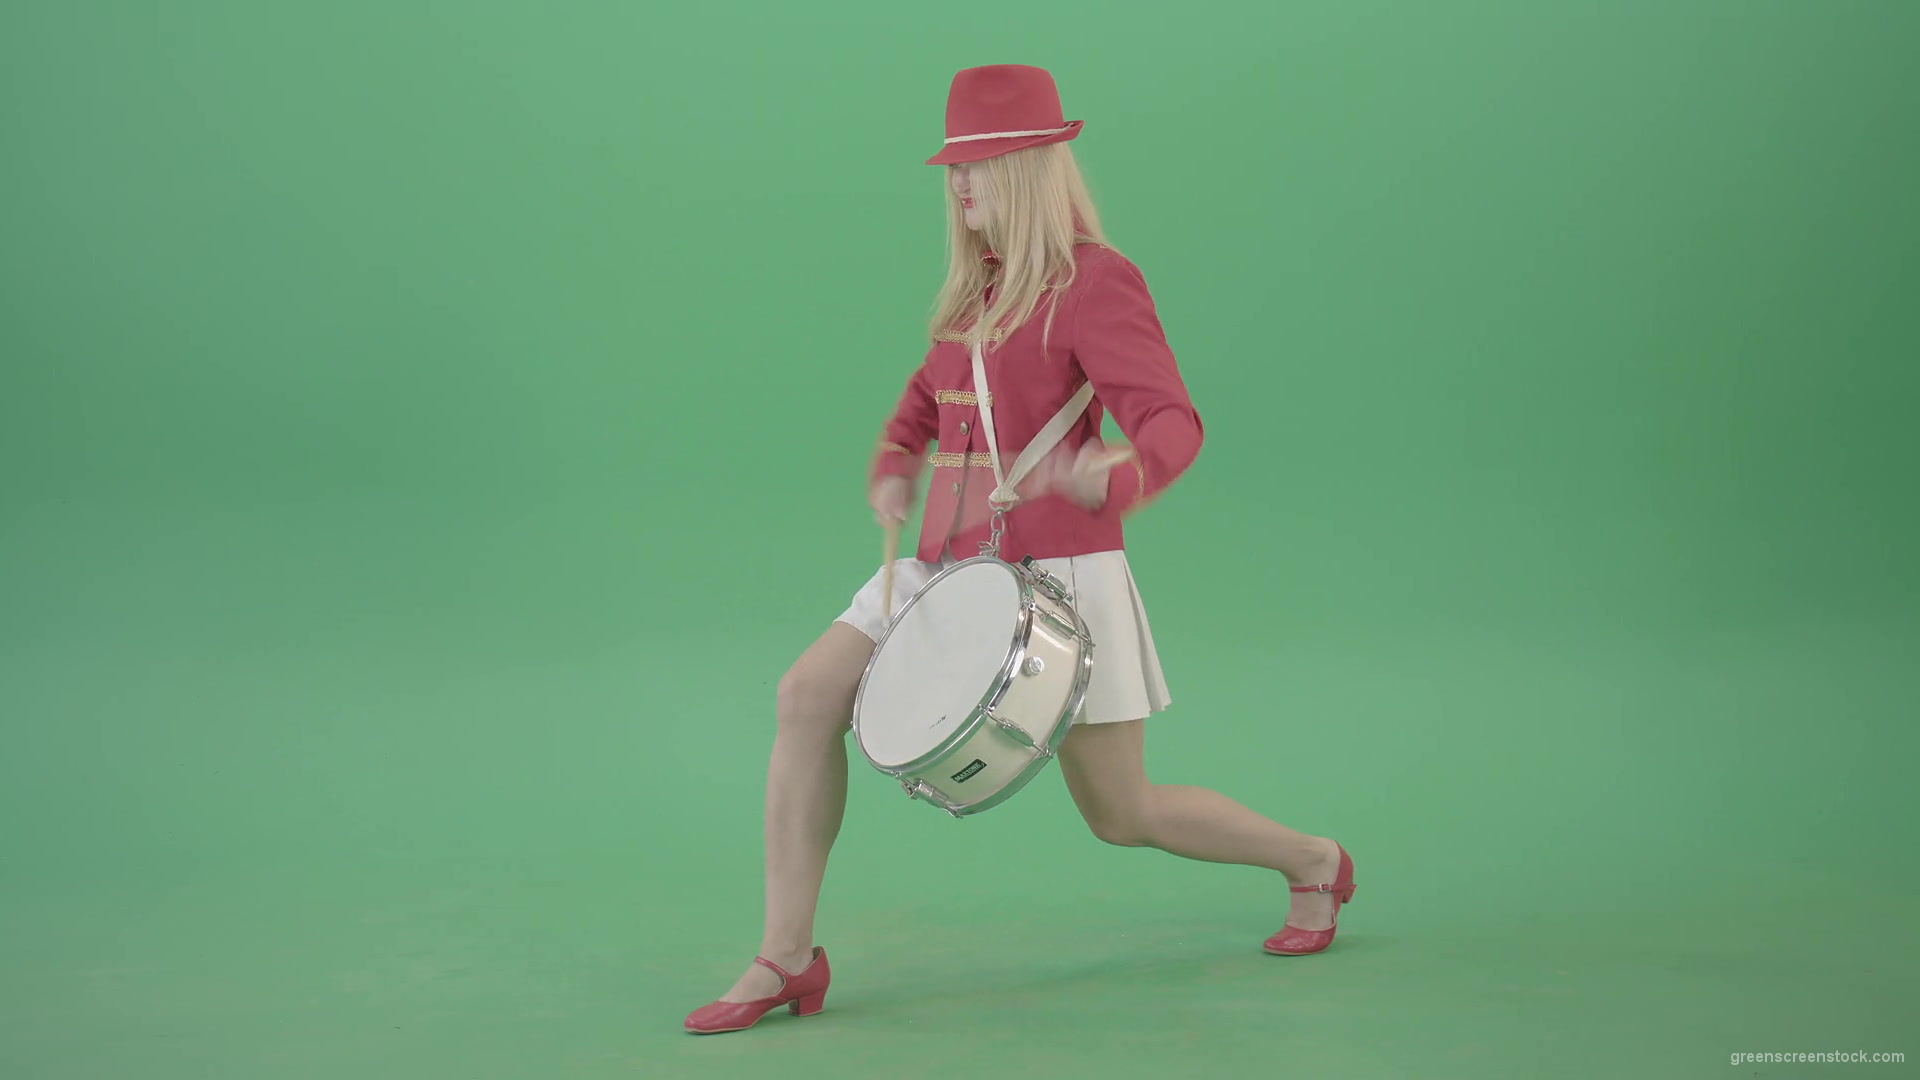 Blondie-is-ready-for-adventure-making-beats-on-snare-drum-isolated-on-Green-Screen-4K-Video-Footage-1920_008 Green Screen Stock